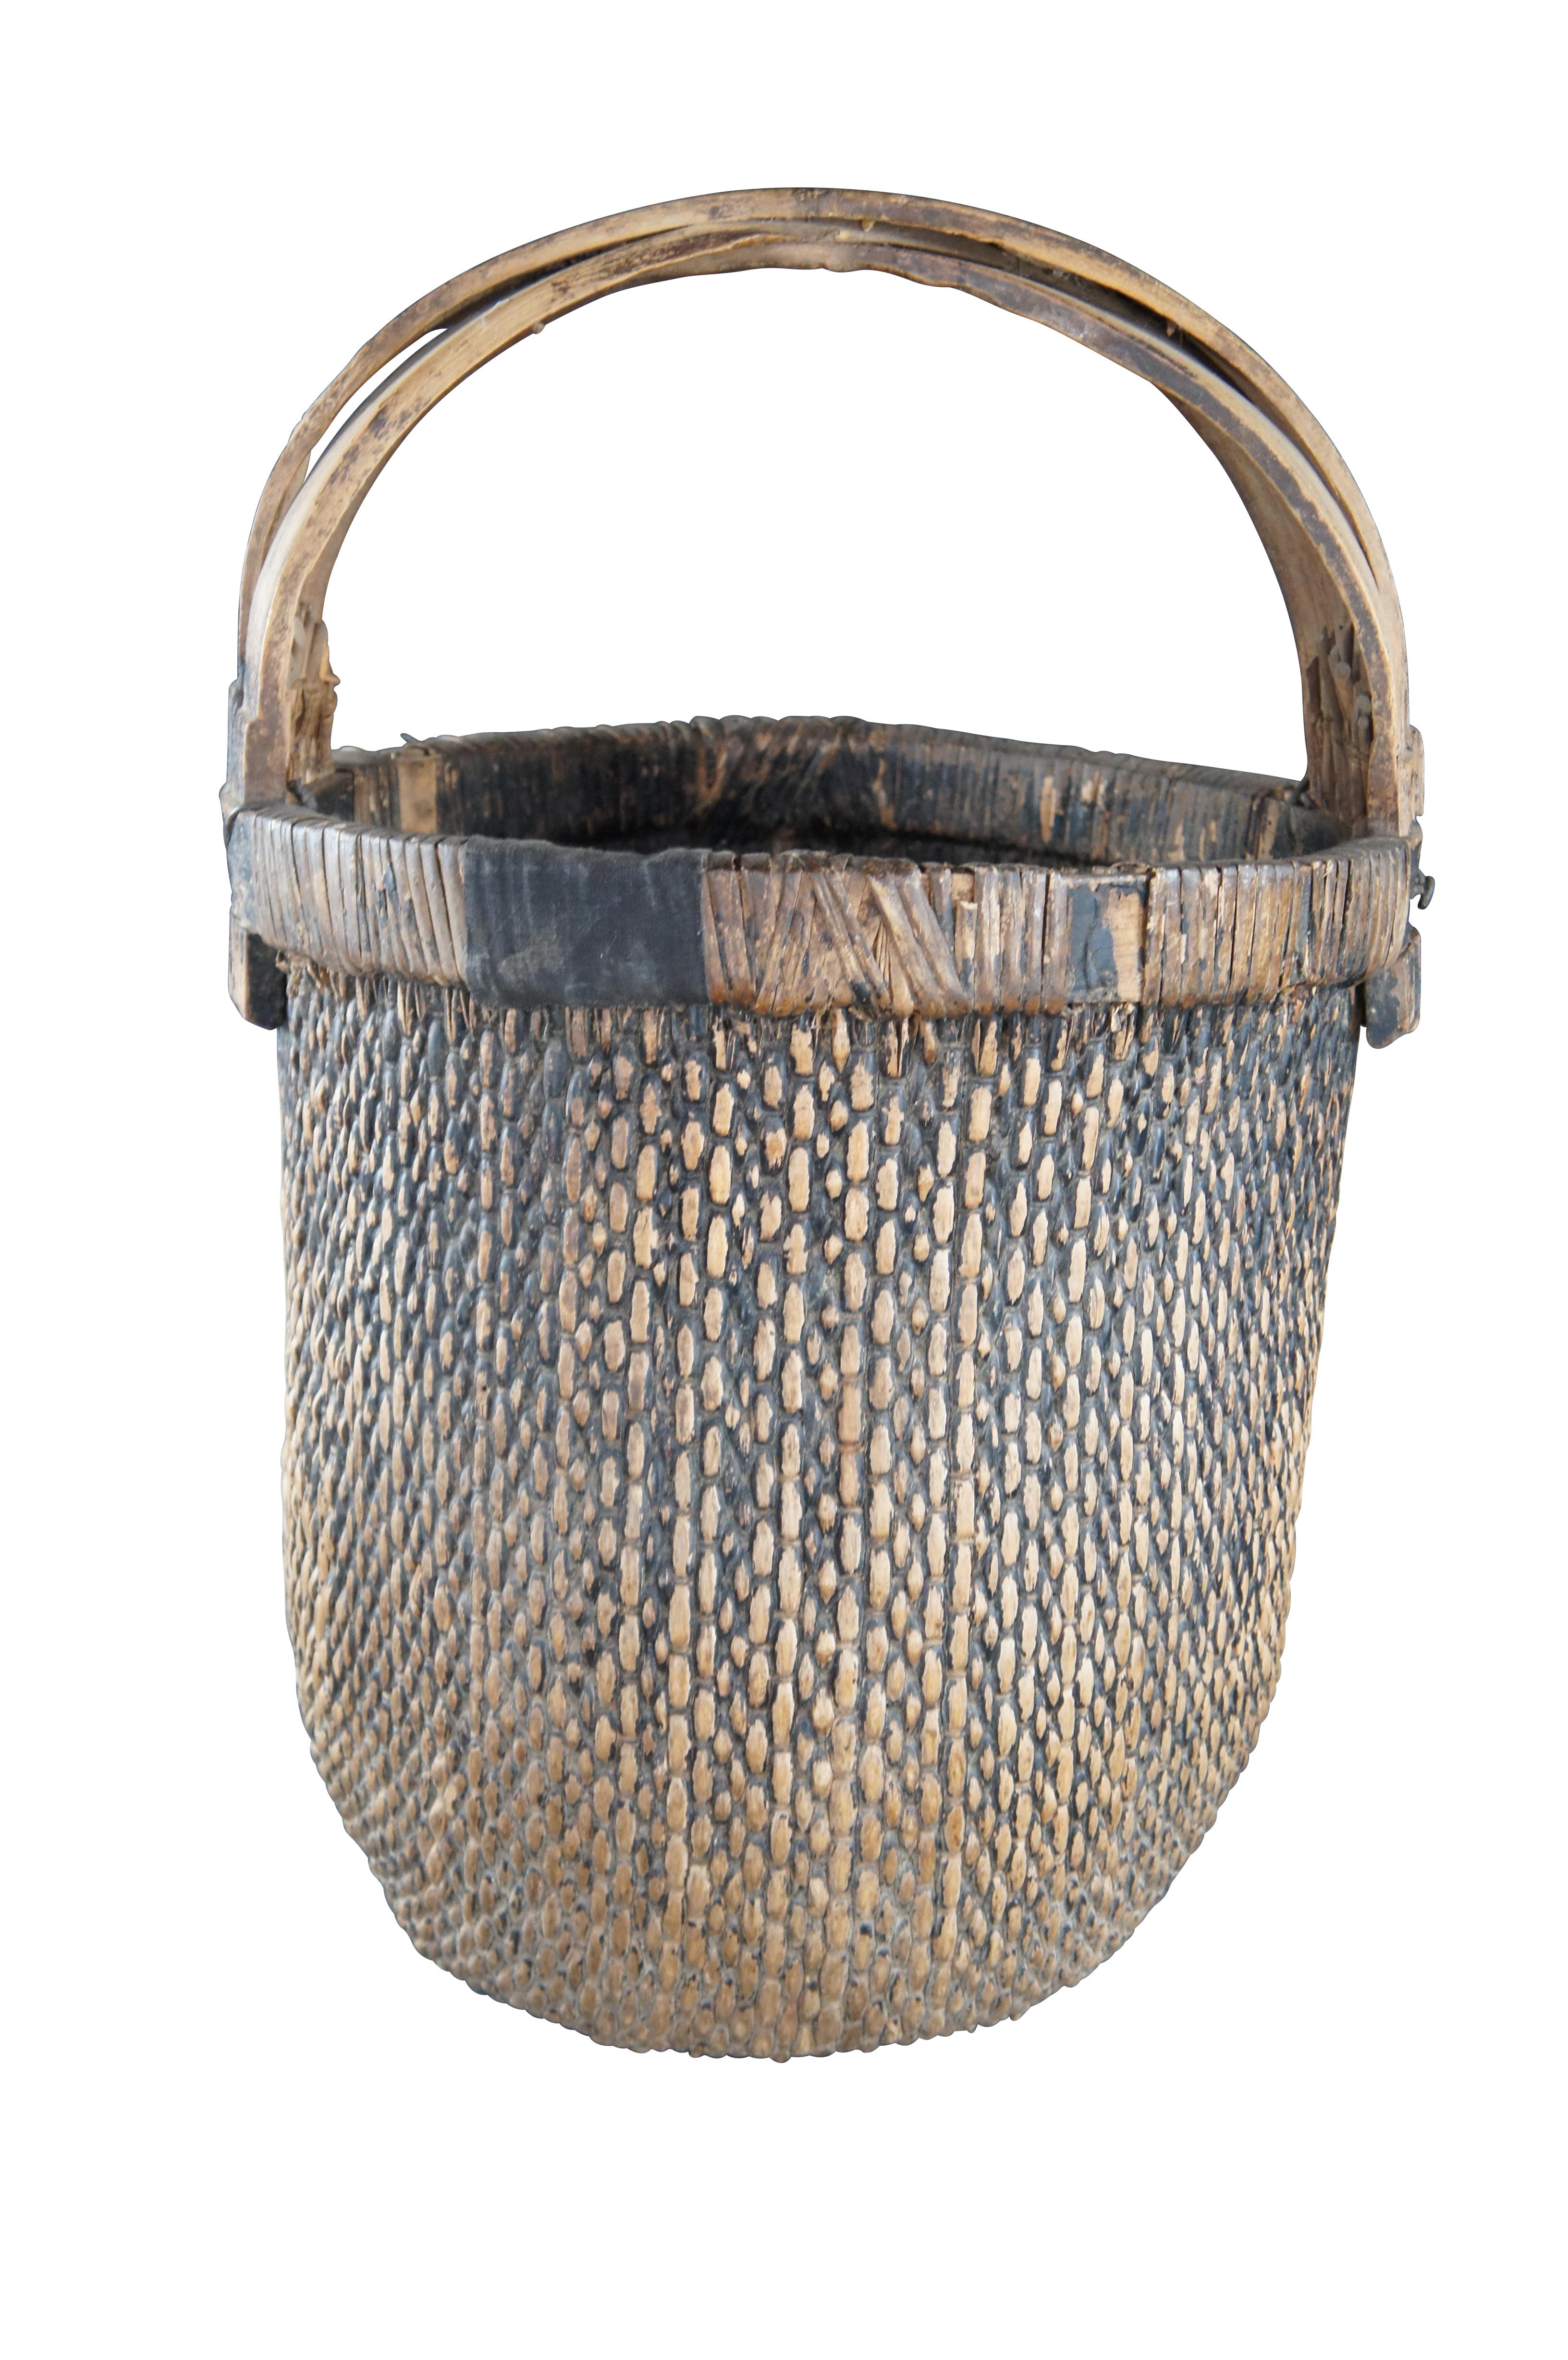 Early 20th Century Chinese Rice Basket. Made from woven reed with a bentwood handle and calligraphy.

Dimensions:
15.5